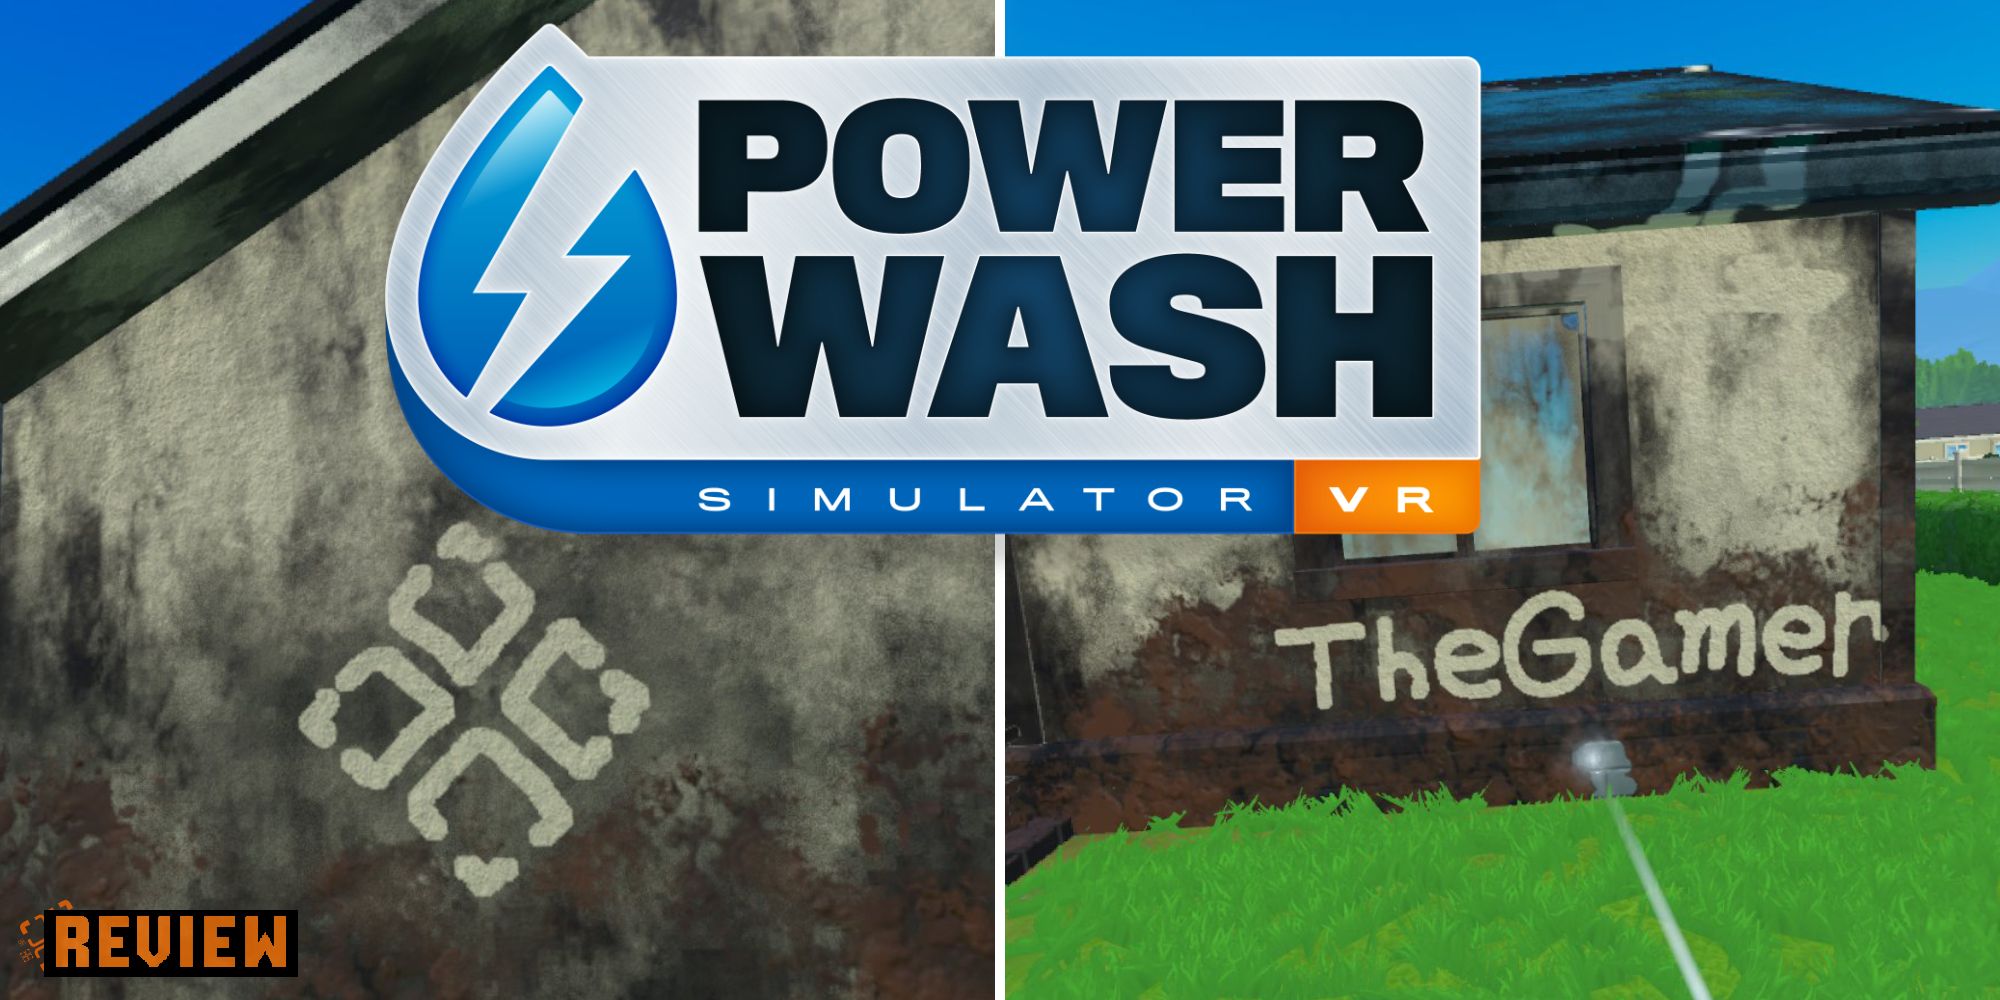 New VR features? Oh, you mean these? 💦😎 #powerwashsimulator